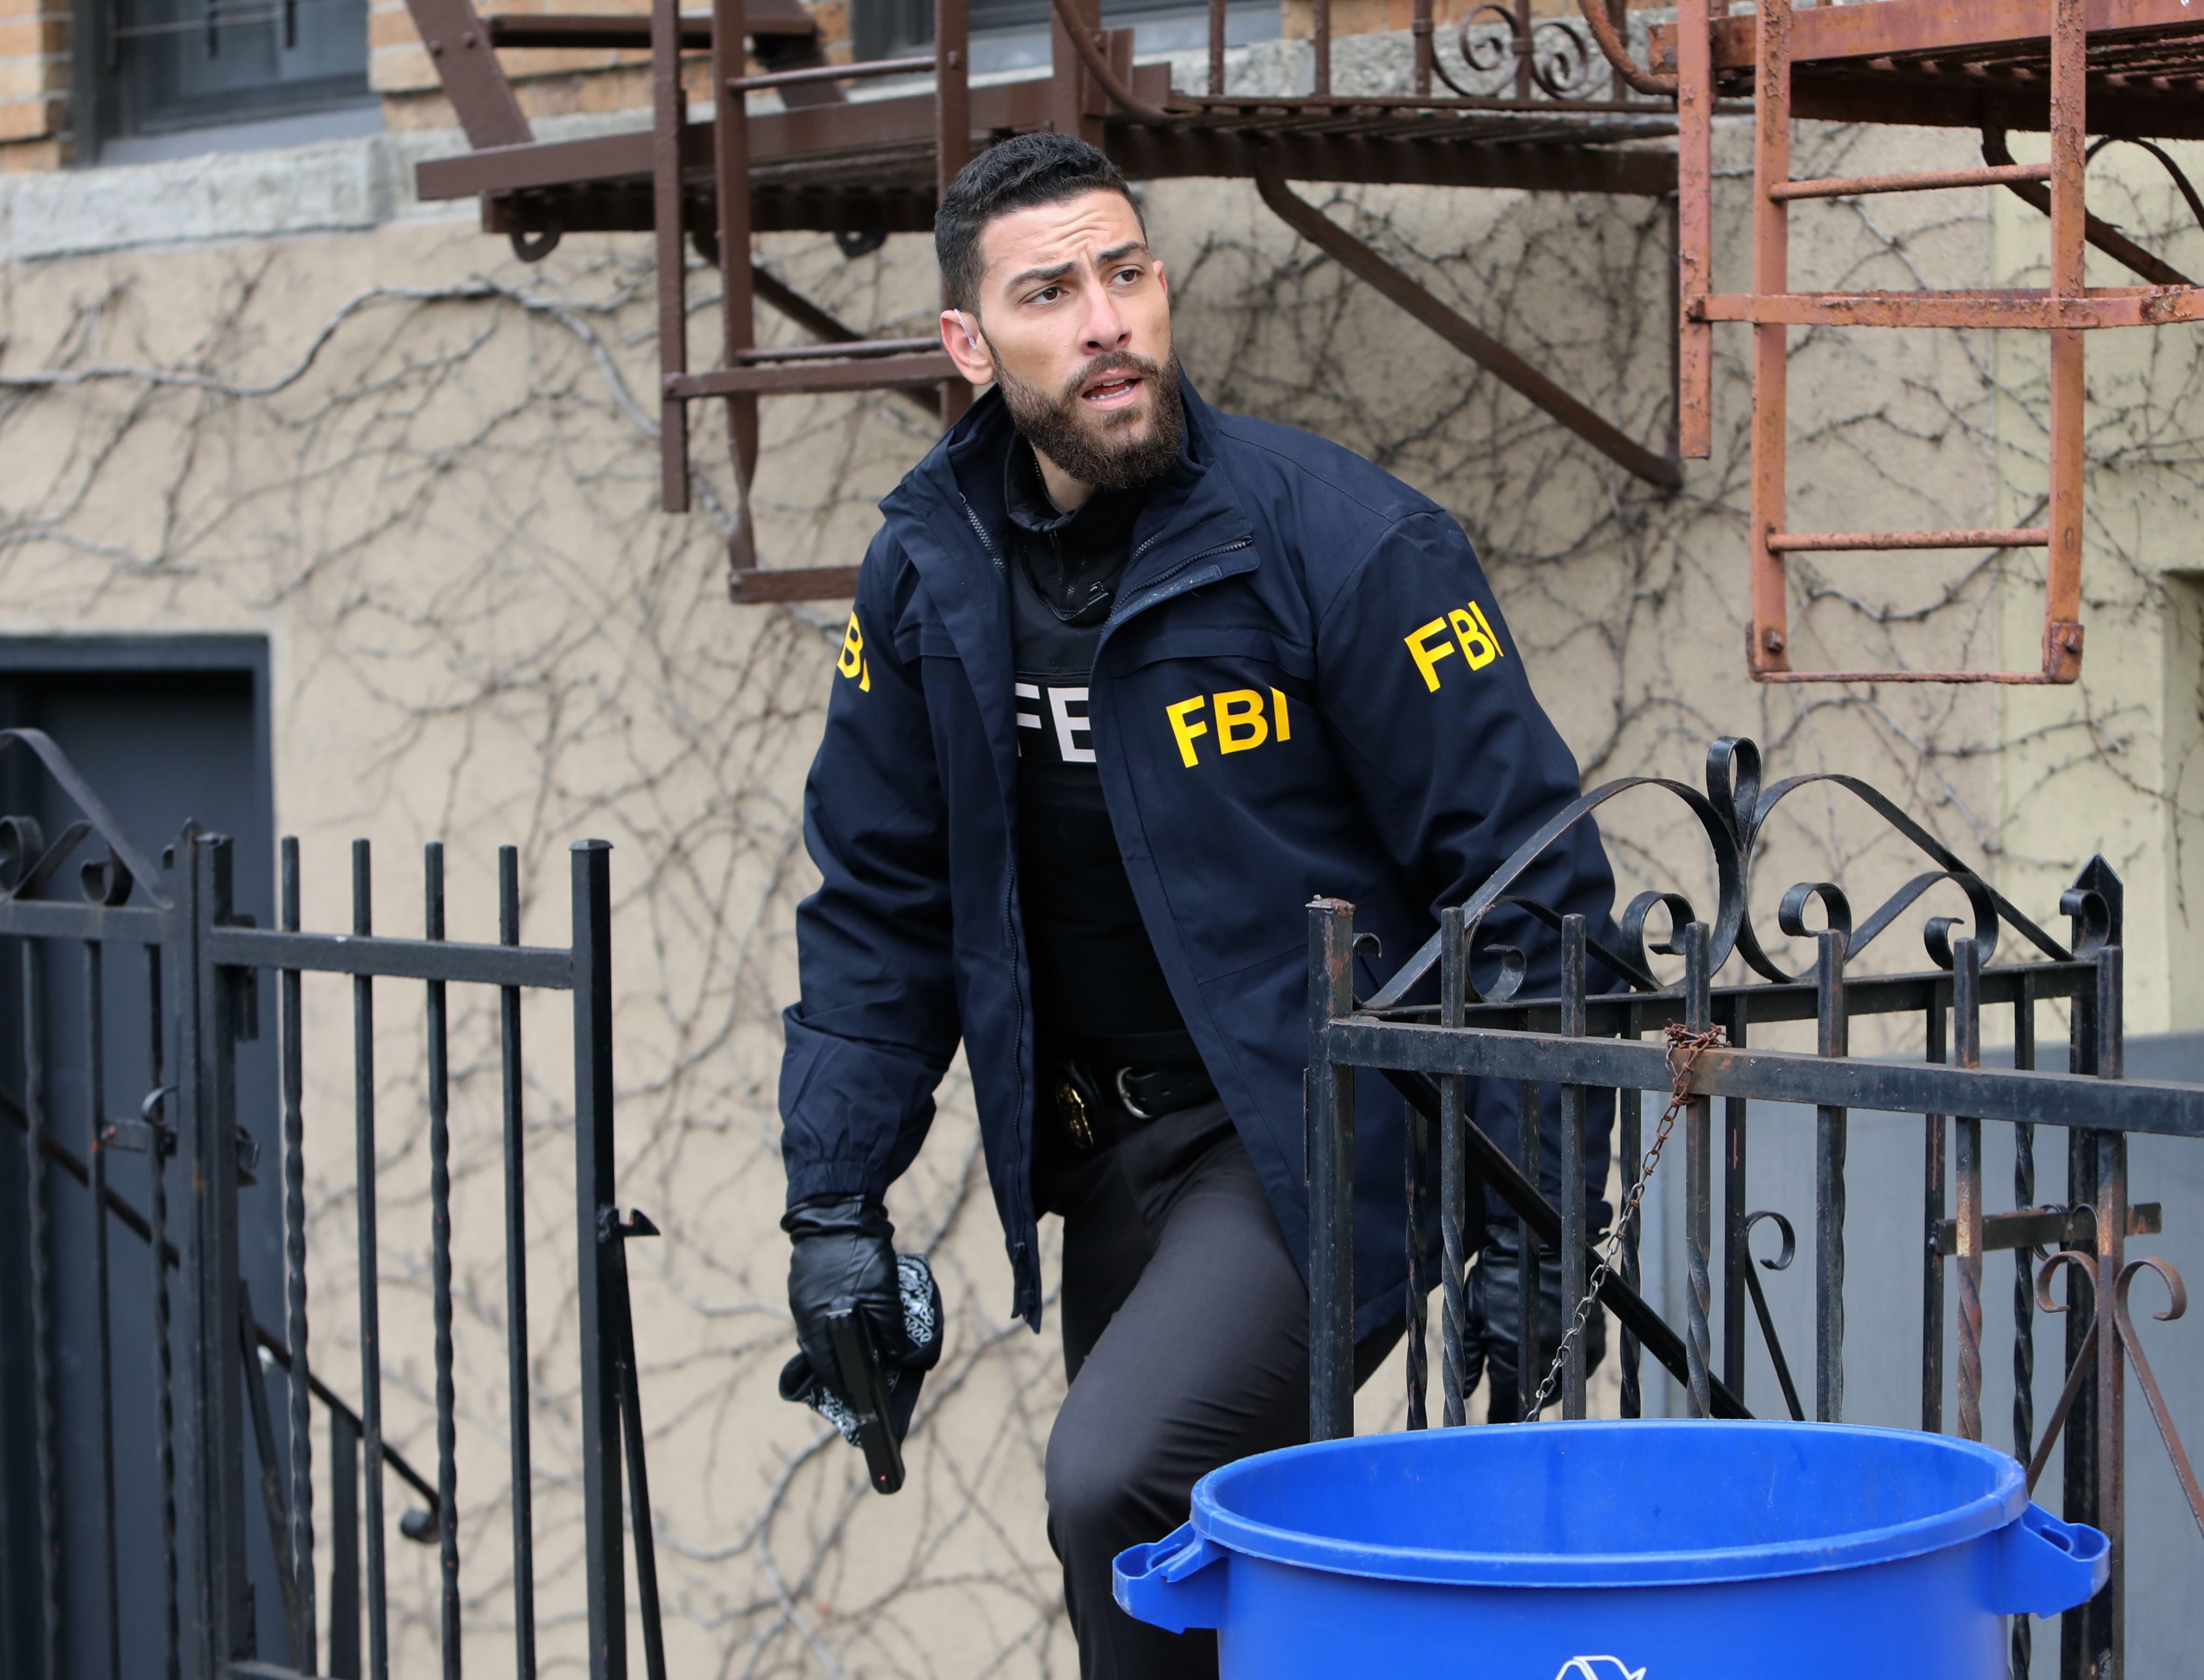 Actor Zeeko Zaki pictured on the set of "FBI" on January 11, 2021 in New York City | Photo: Getty Images